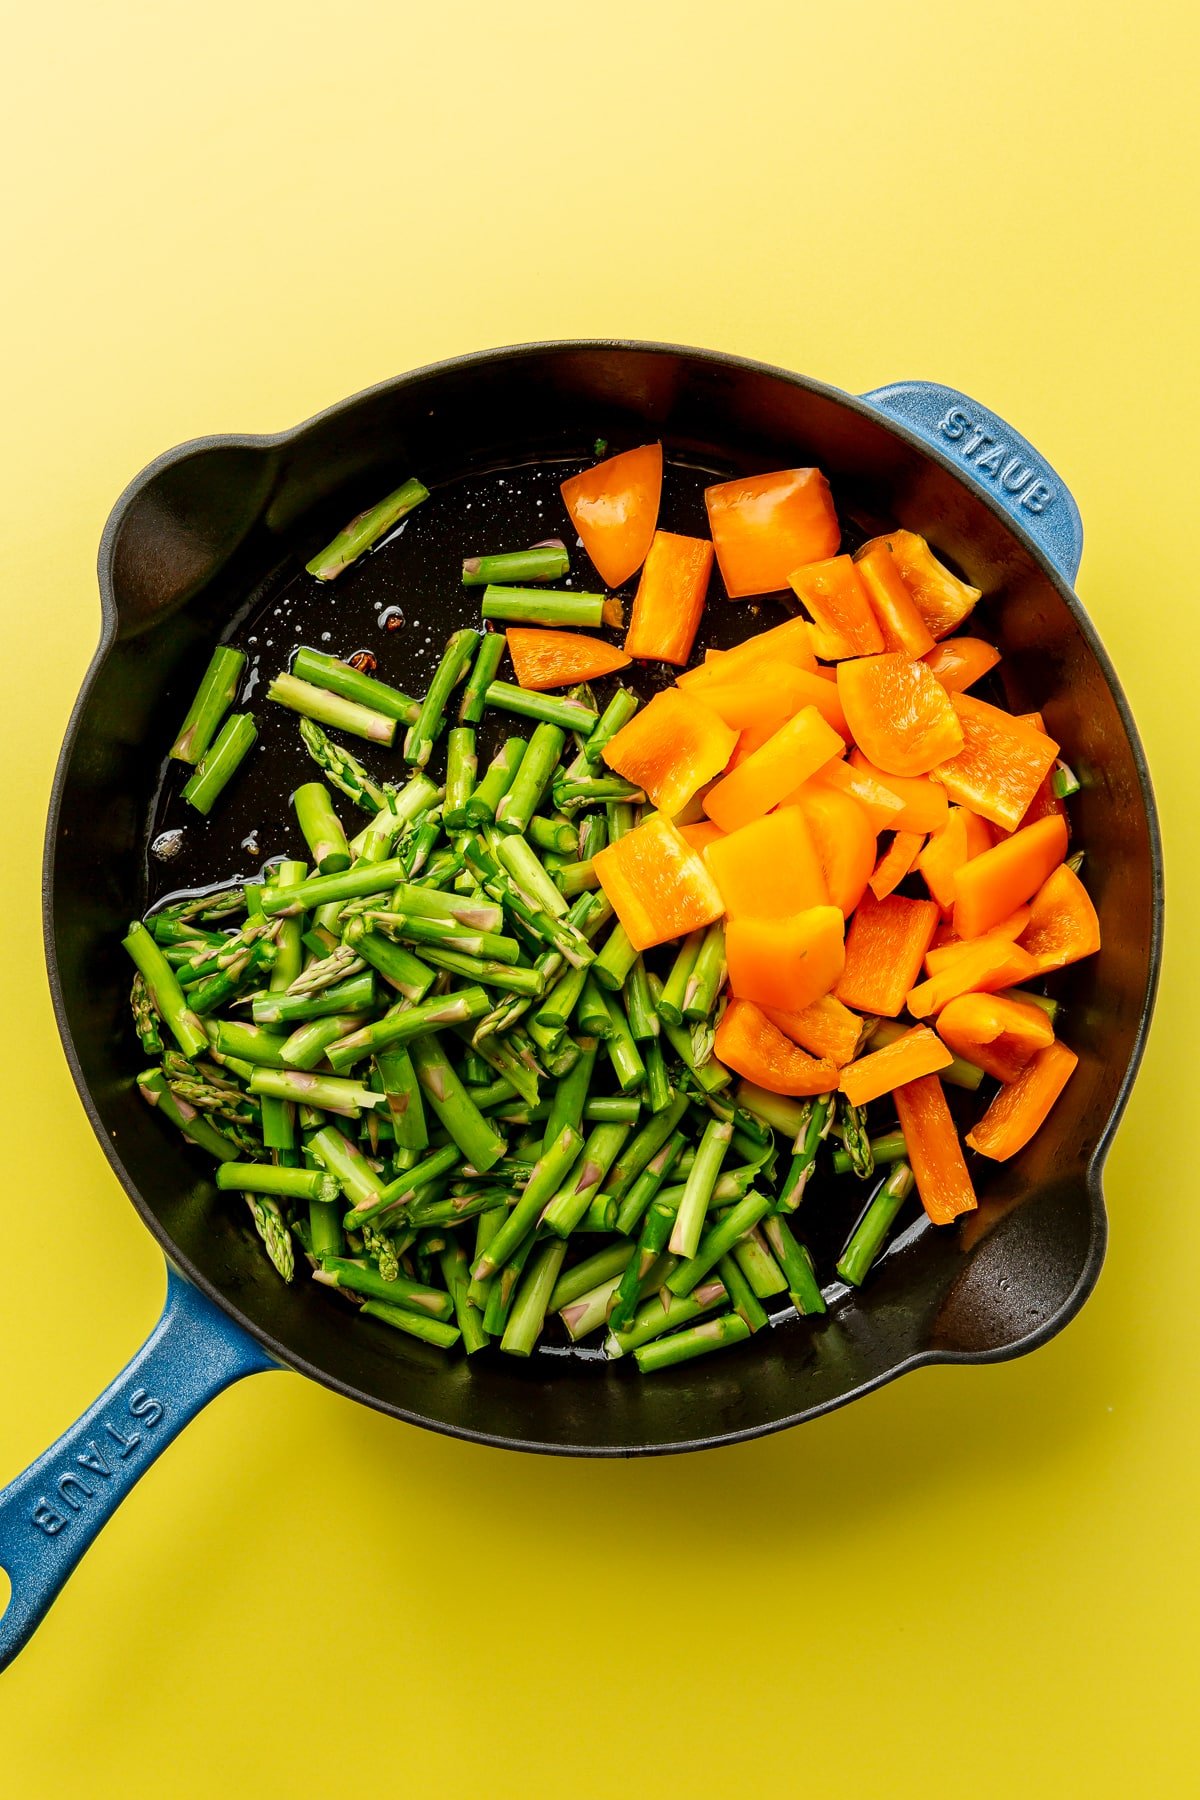 The bacon has been removed from the skillet and been replaced by chopped asparagus and orange bell pepper.